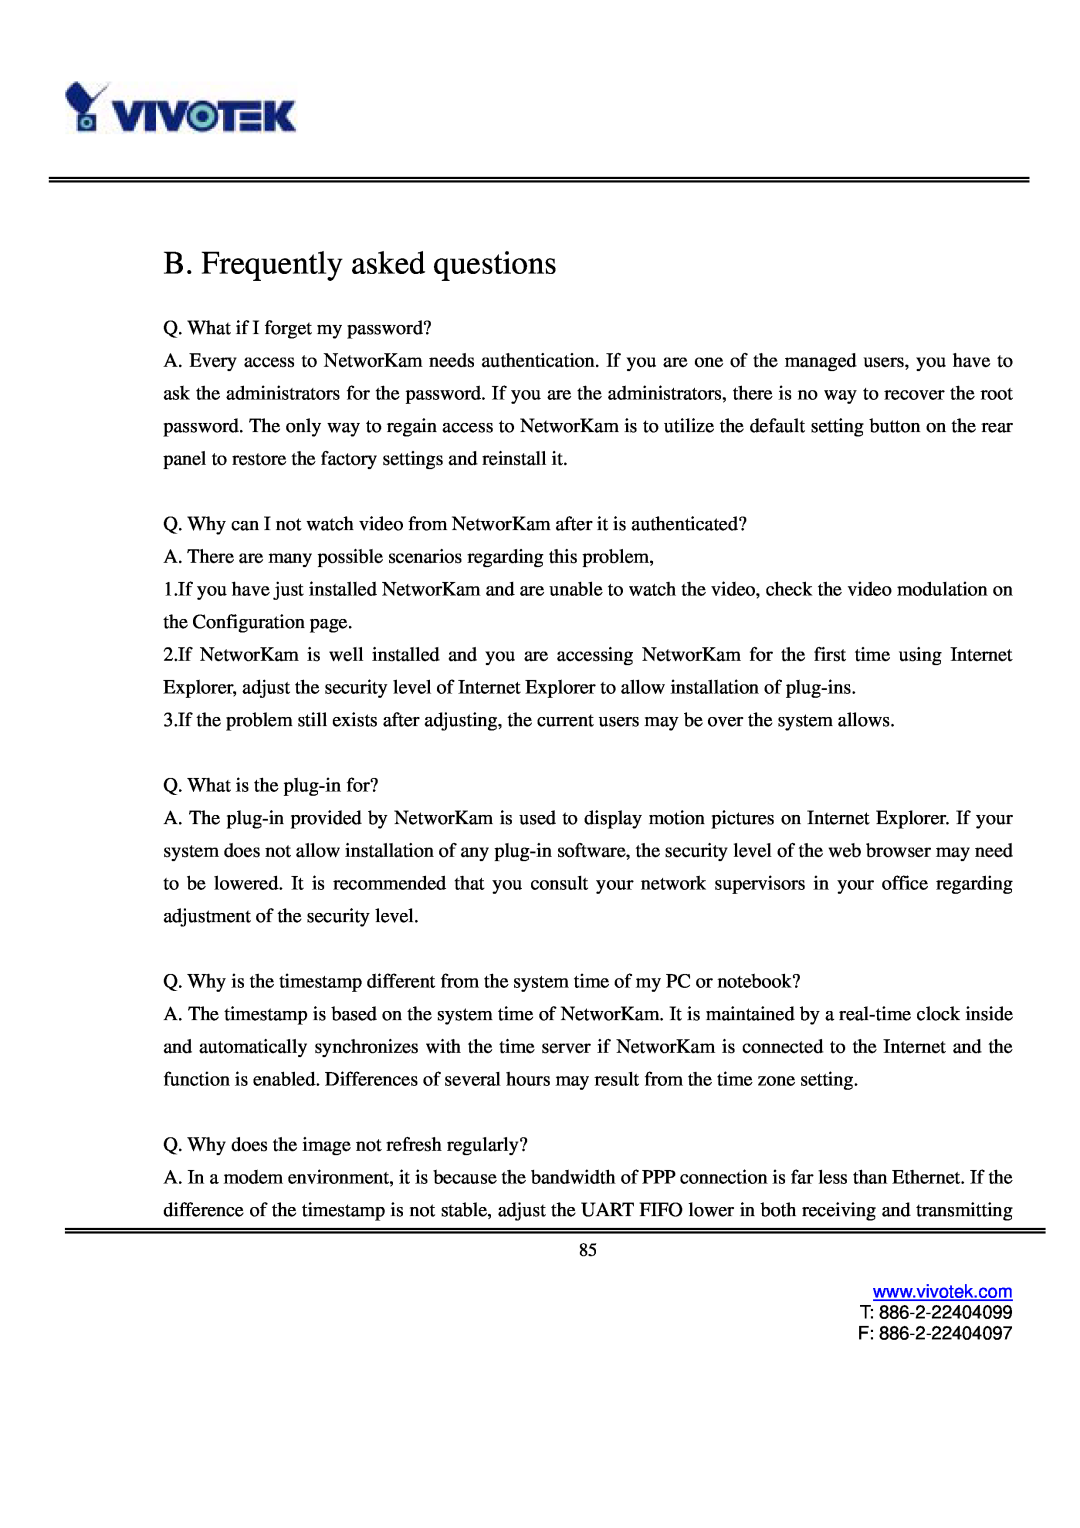 Vivotek IP3111/IP3121 user manual B. Frequently asked questions 